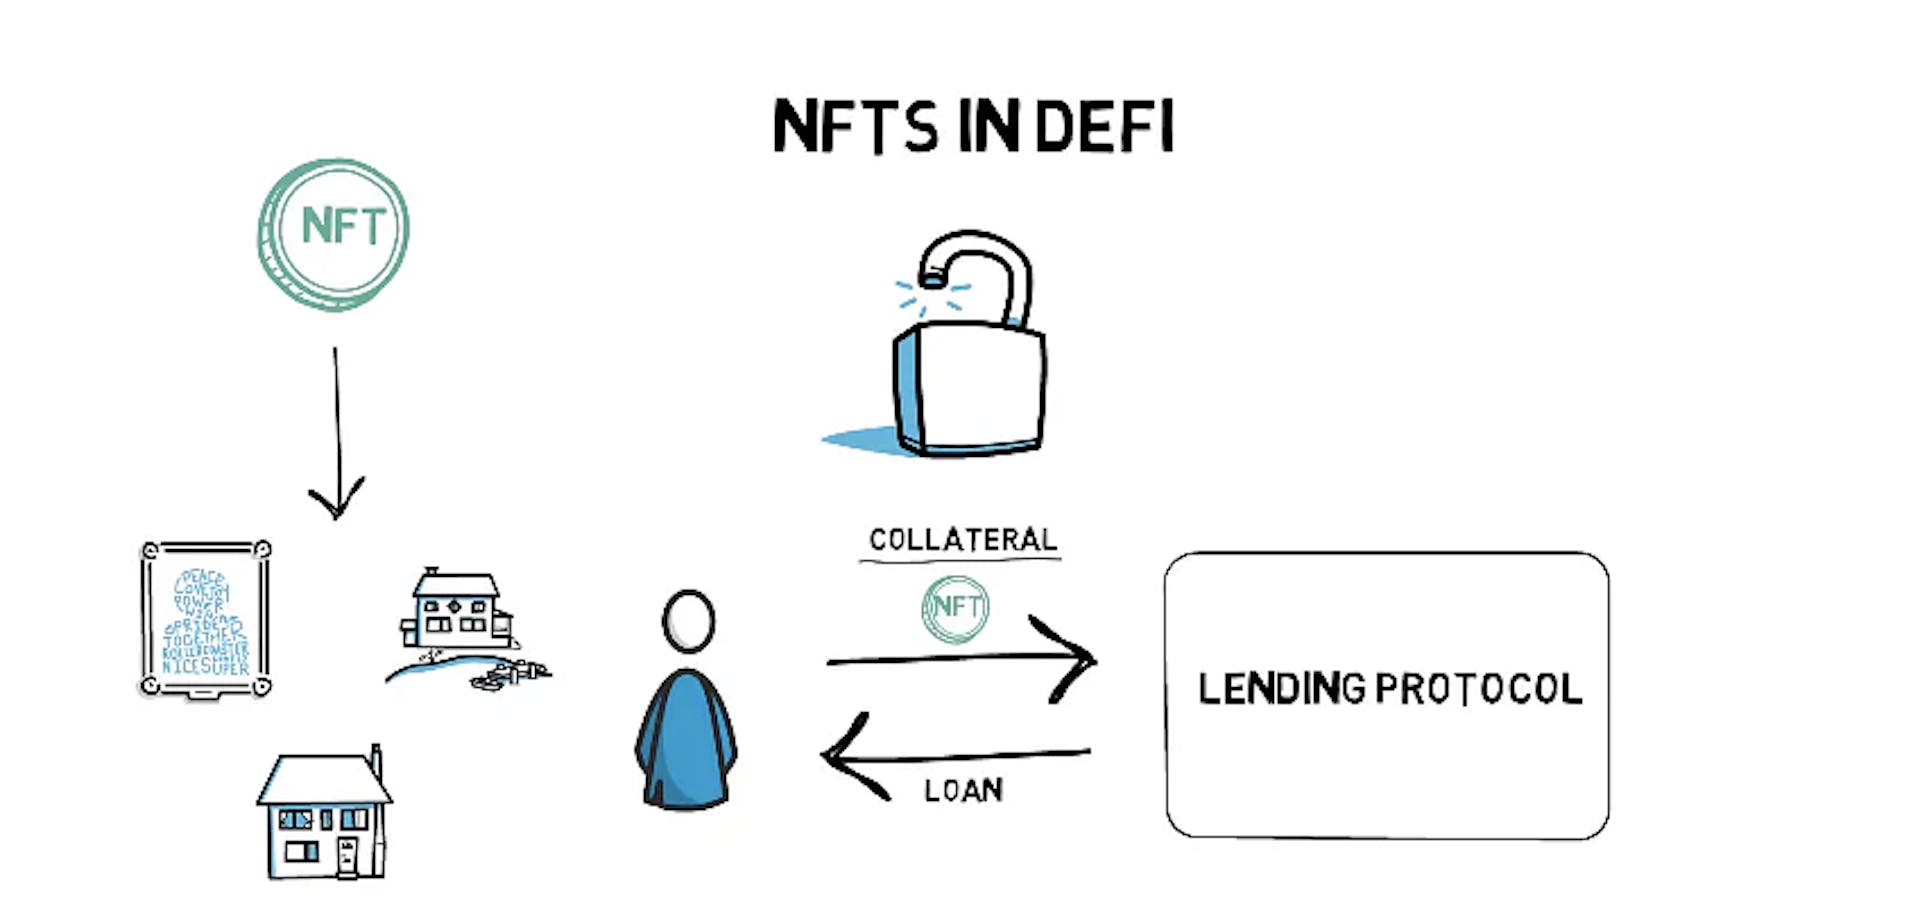 A flowchart showing the use of NFTs as collateral in lending protocols: SimpliLearn